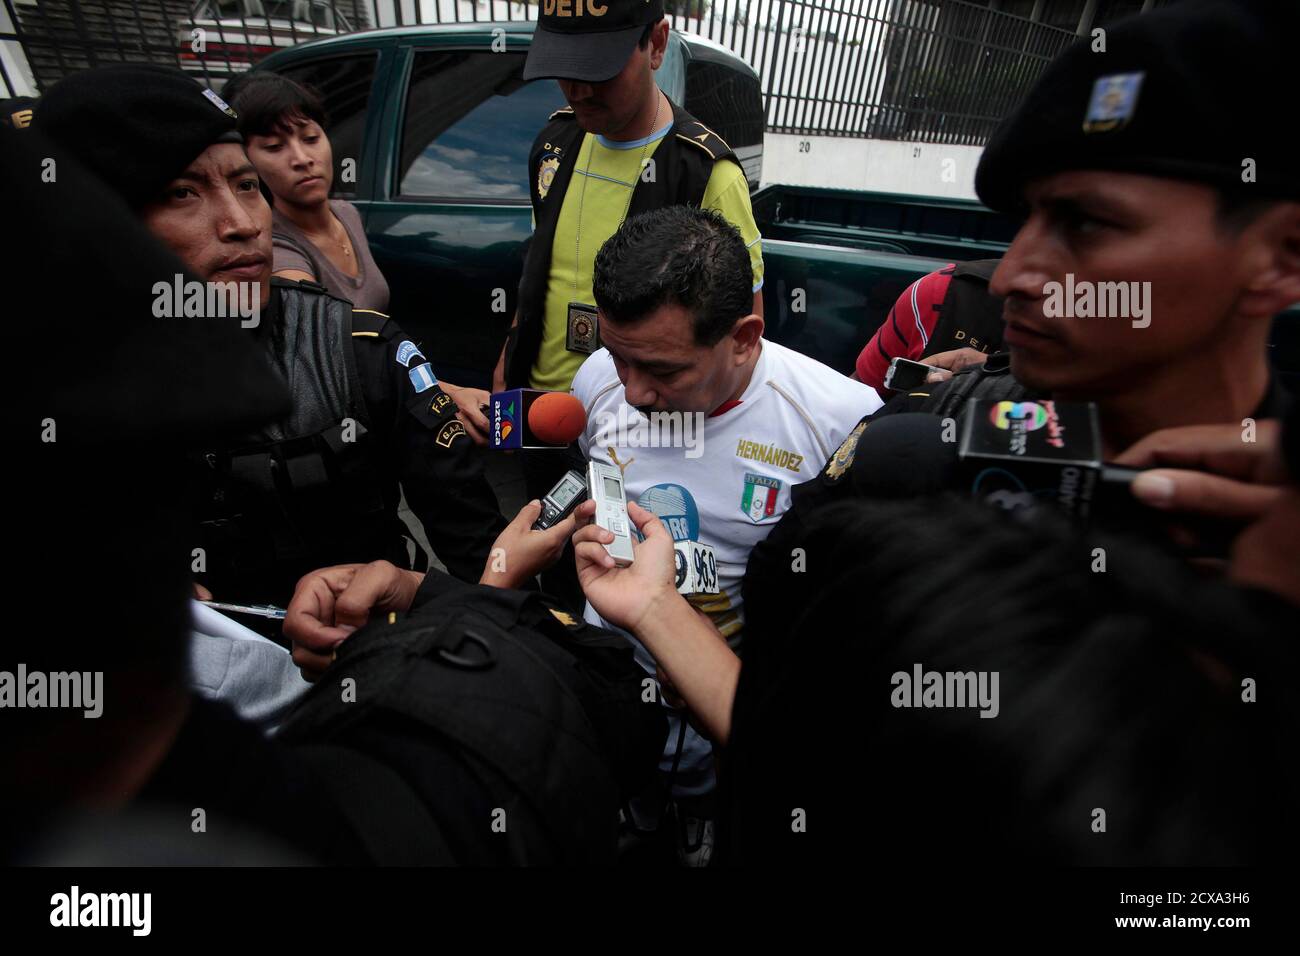 Police escort Juan Hernandez Sanchez (C), a suspect in the murder of Argentine folk singer Facundo Cabral, in Guatemala City July 31, 2011. Cabral was killed on July 9, 2011 while on the way to the airport in Guatemala City when gunmen opened fire on the car he was in as part of a plot by organized crime gangs to kill his music promoter Henry Farina. Farina, who was driving the car at the time of the shooting, was badly injured. Hernandez Sanchez, 45, is the third man to be detained in connection with the case when he was arrested on Sunday in Aldea Aceituno in the Escuintla region while in th Foto de stock